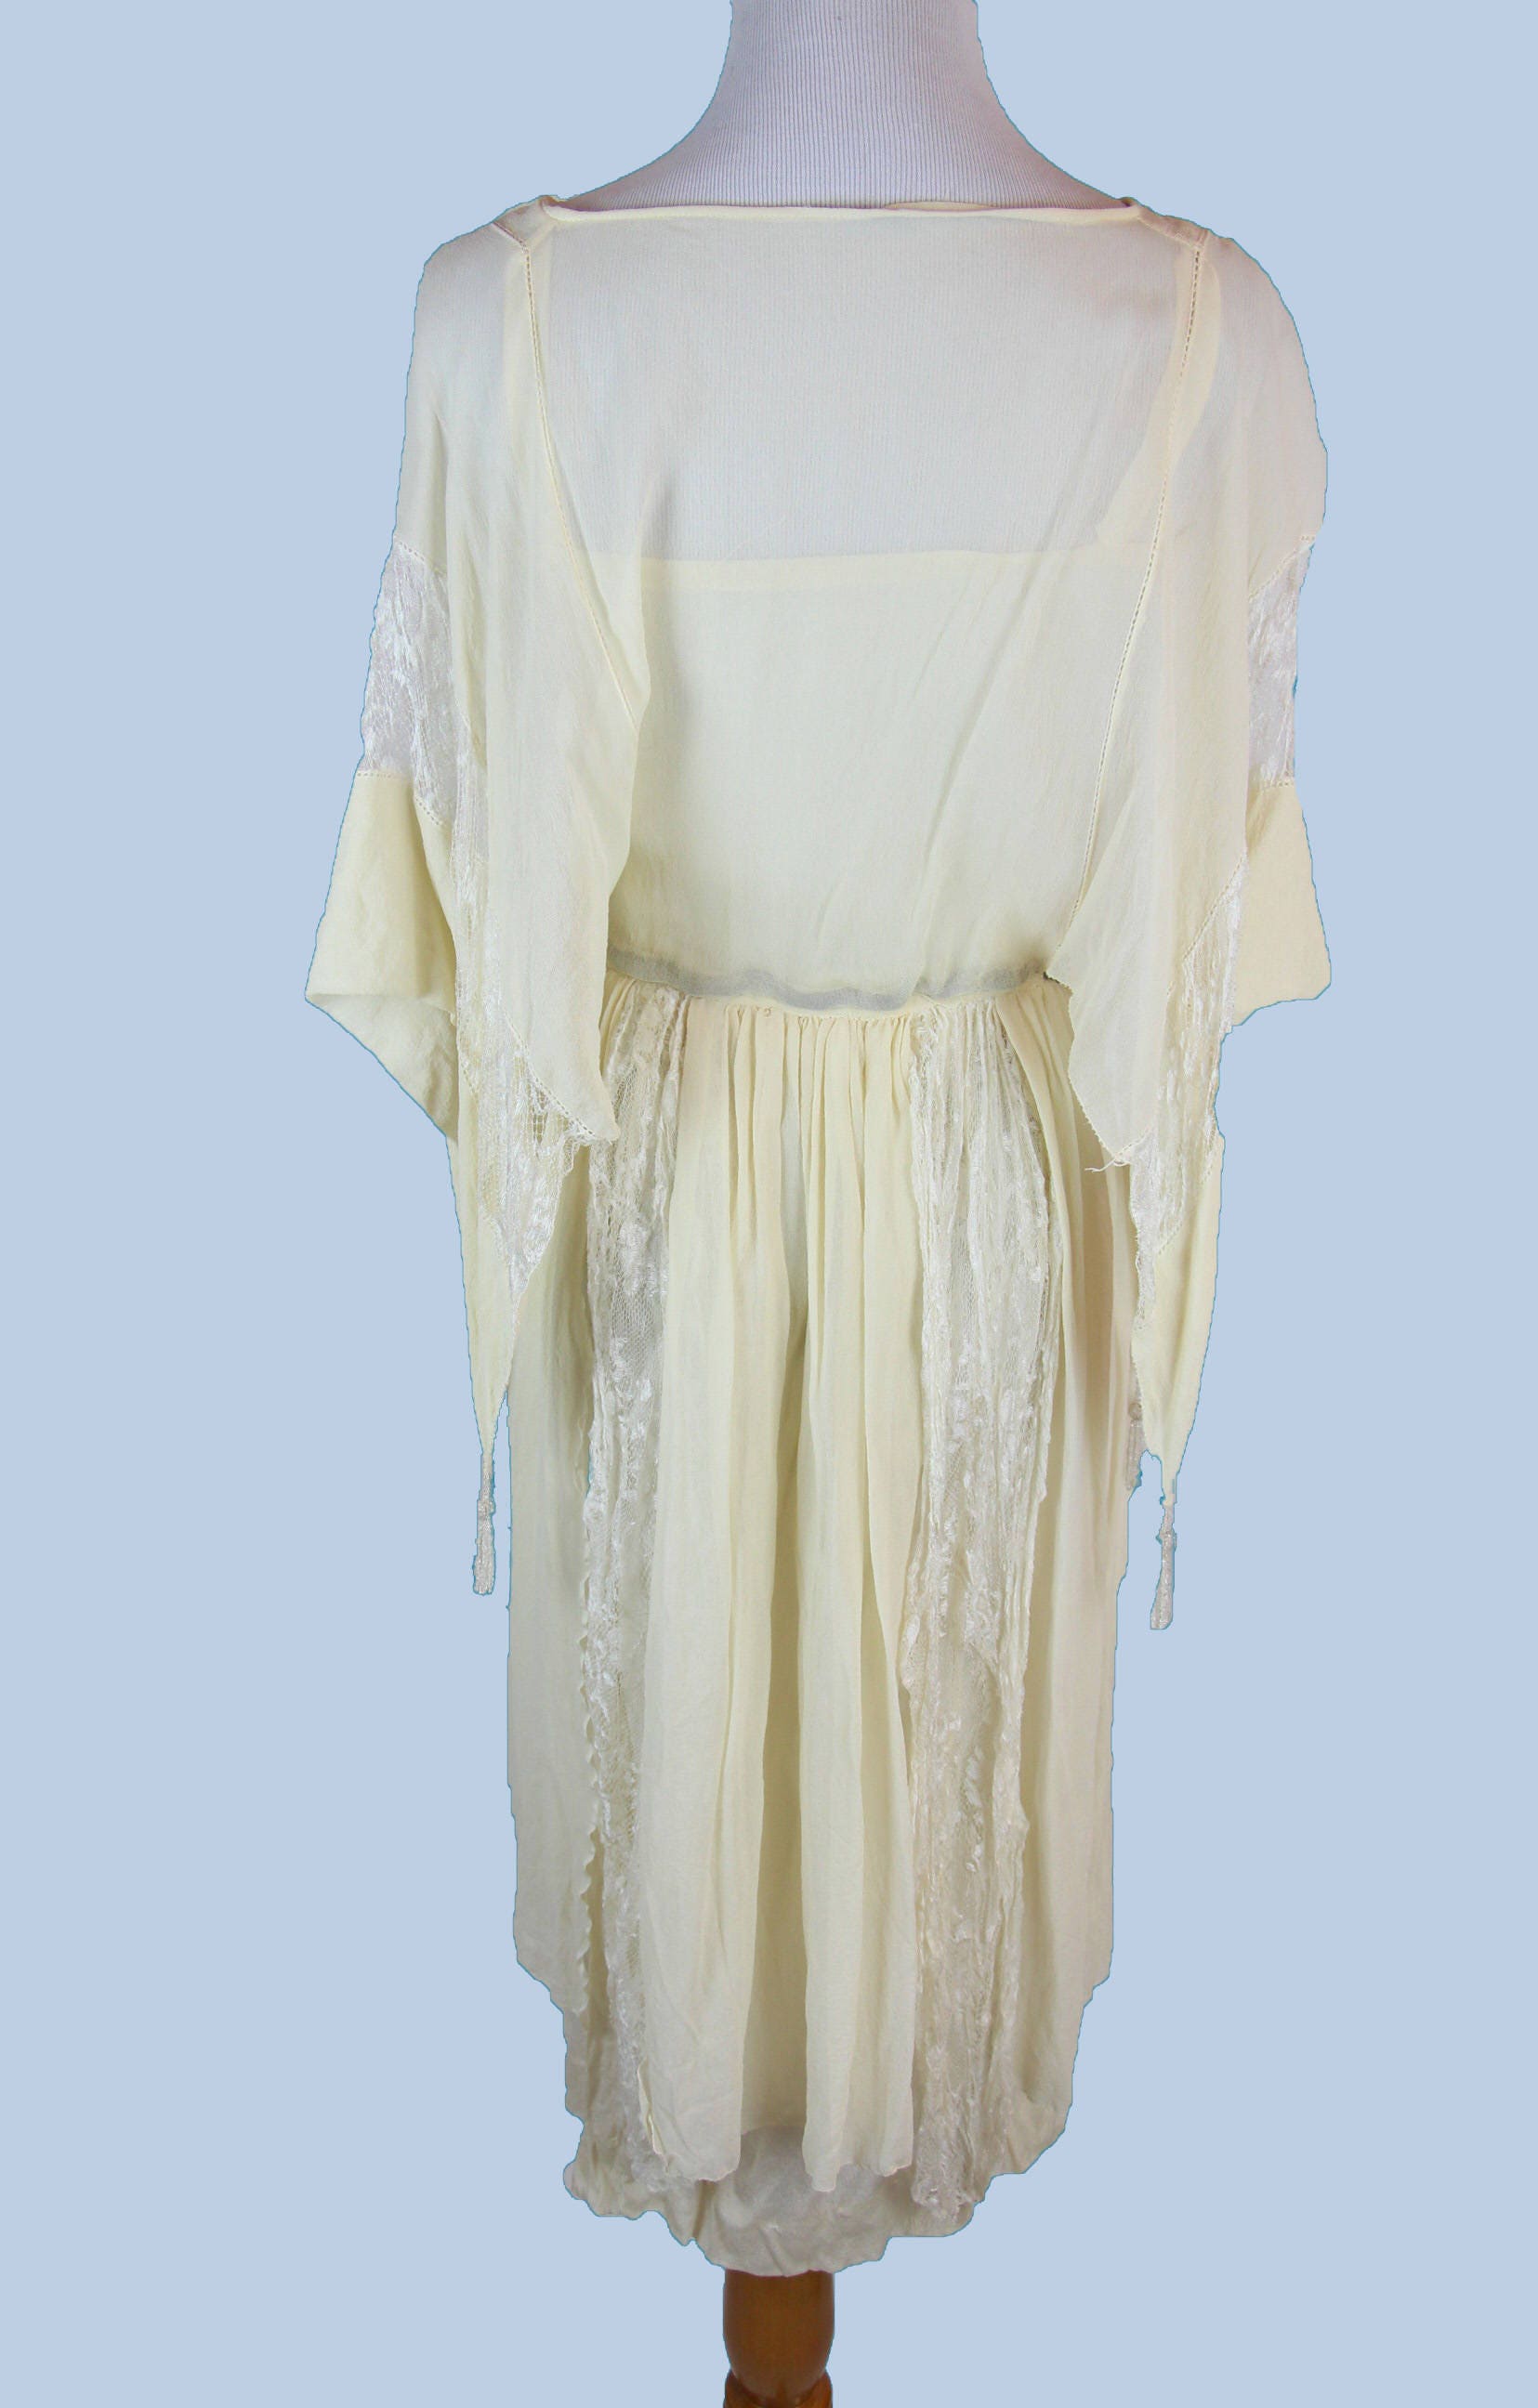 Vintage 1920s Lace Panels Dress Pure Silk White Party Wedding - Etsy